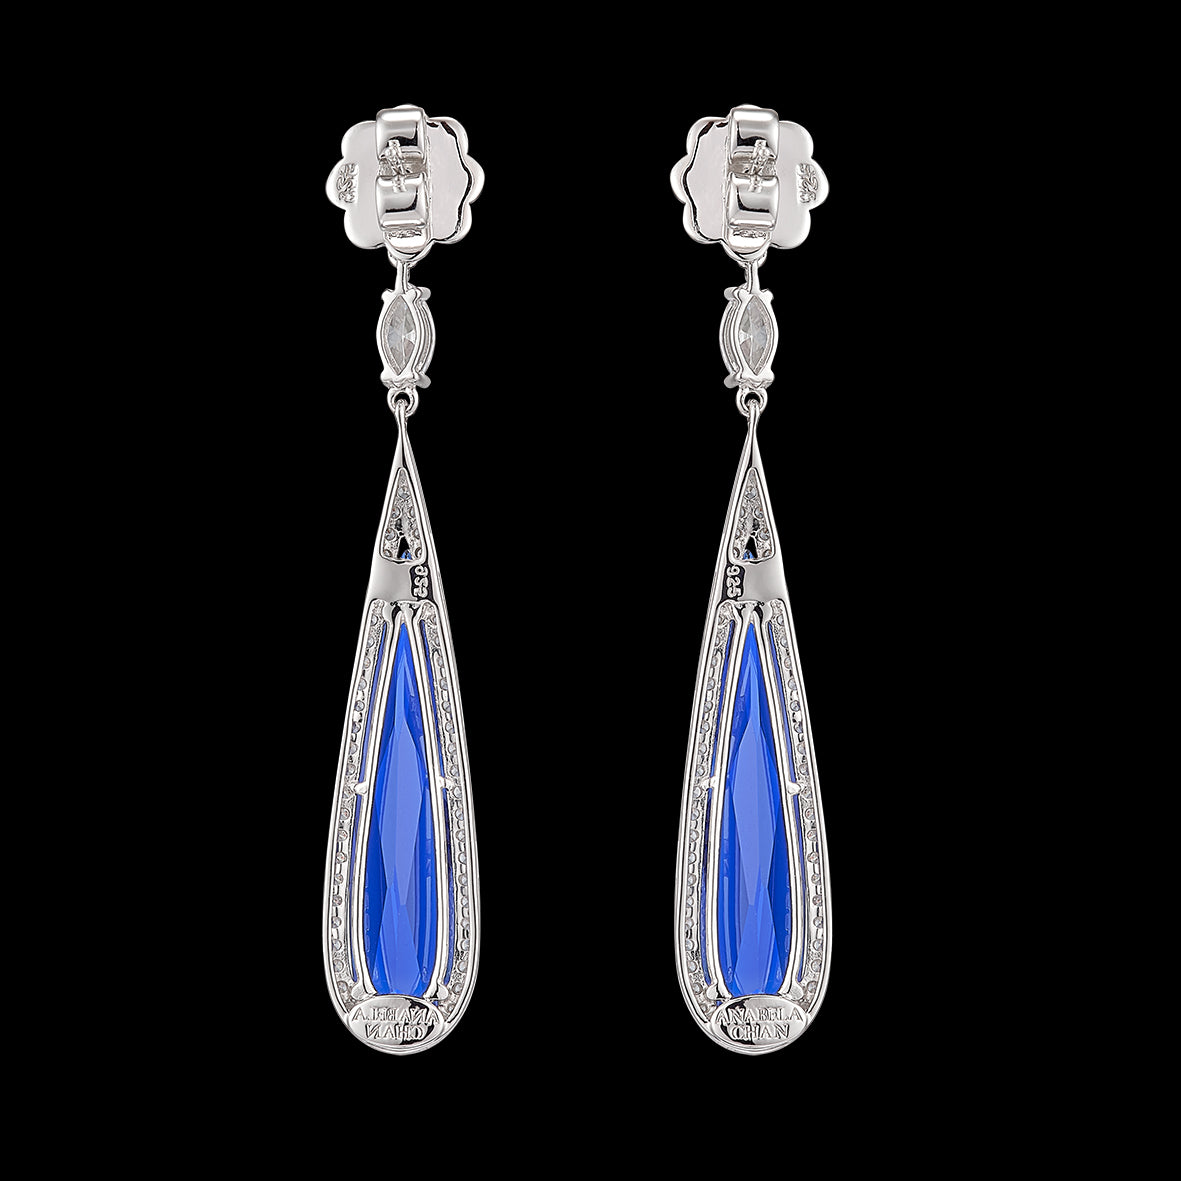 Shard Sapphire Earrings, Earrings, Anabela Chan Joaillerie - Fine jewelry with laboratory grown and created gemstones hand-crafted in the United Kingdom. Anabela Chan Joaillerie is the first fine jewellery brand in the world to champion laboratory-grown and created gemstones with high jewellery design, artisanal craftsmanship and a focus on ethical and sustainable innovations.